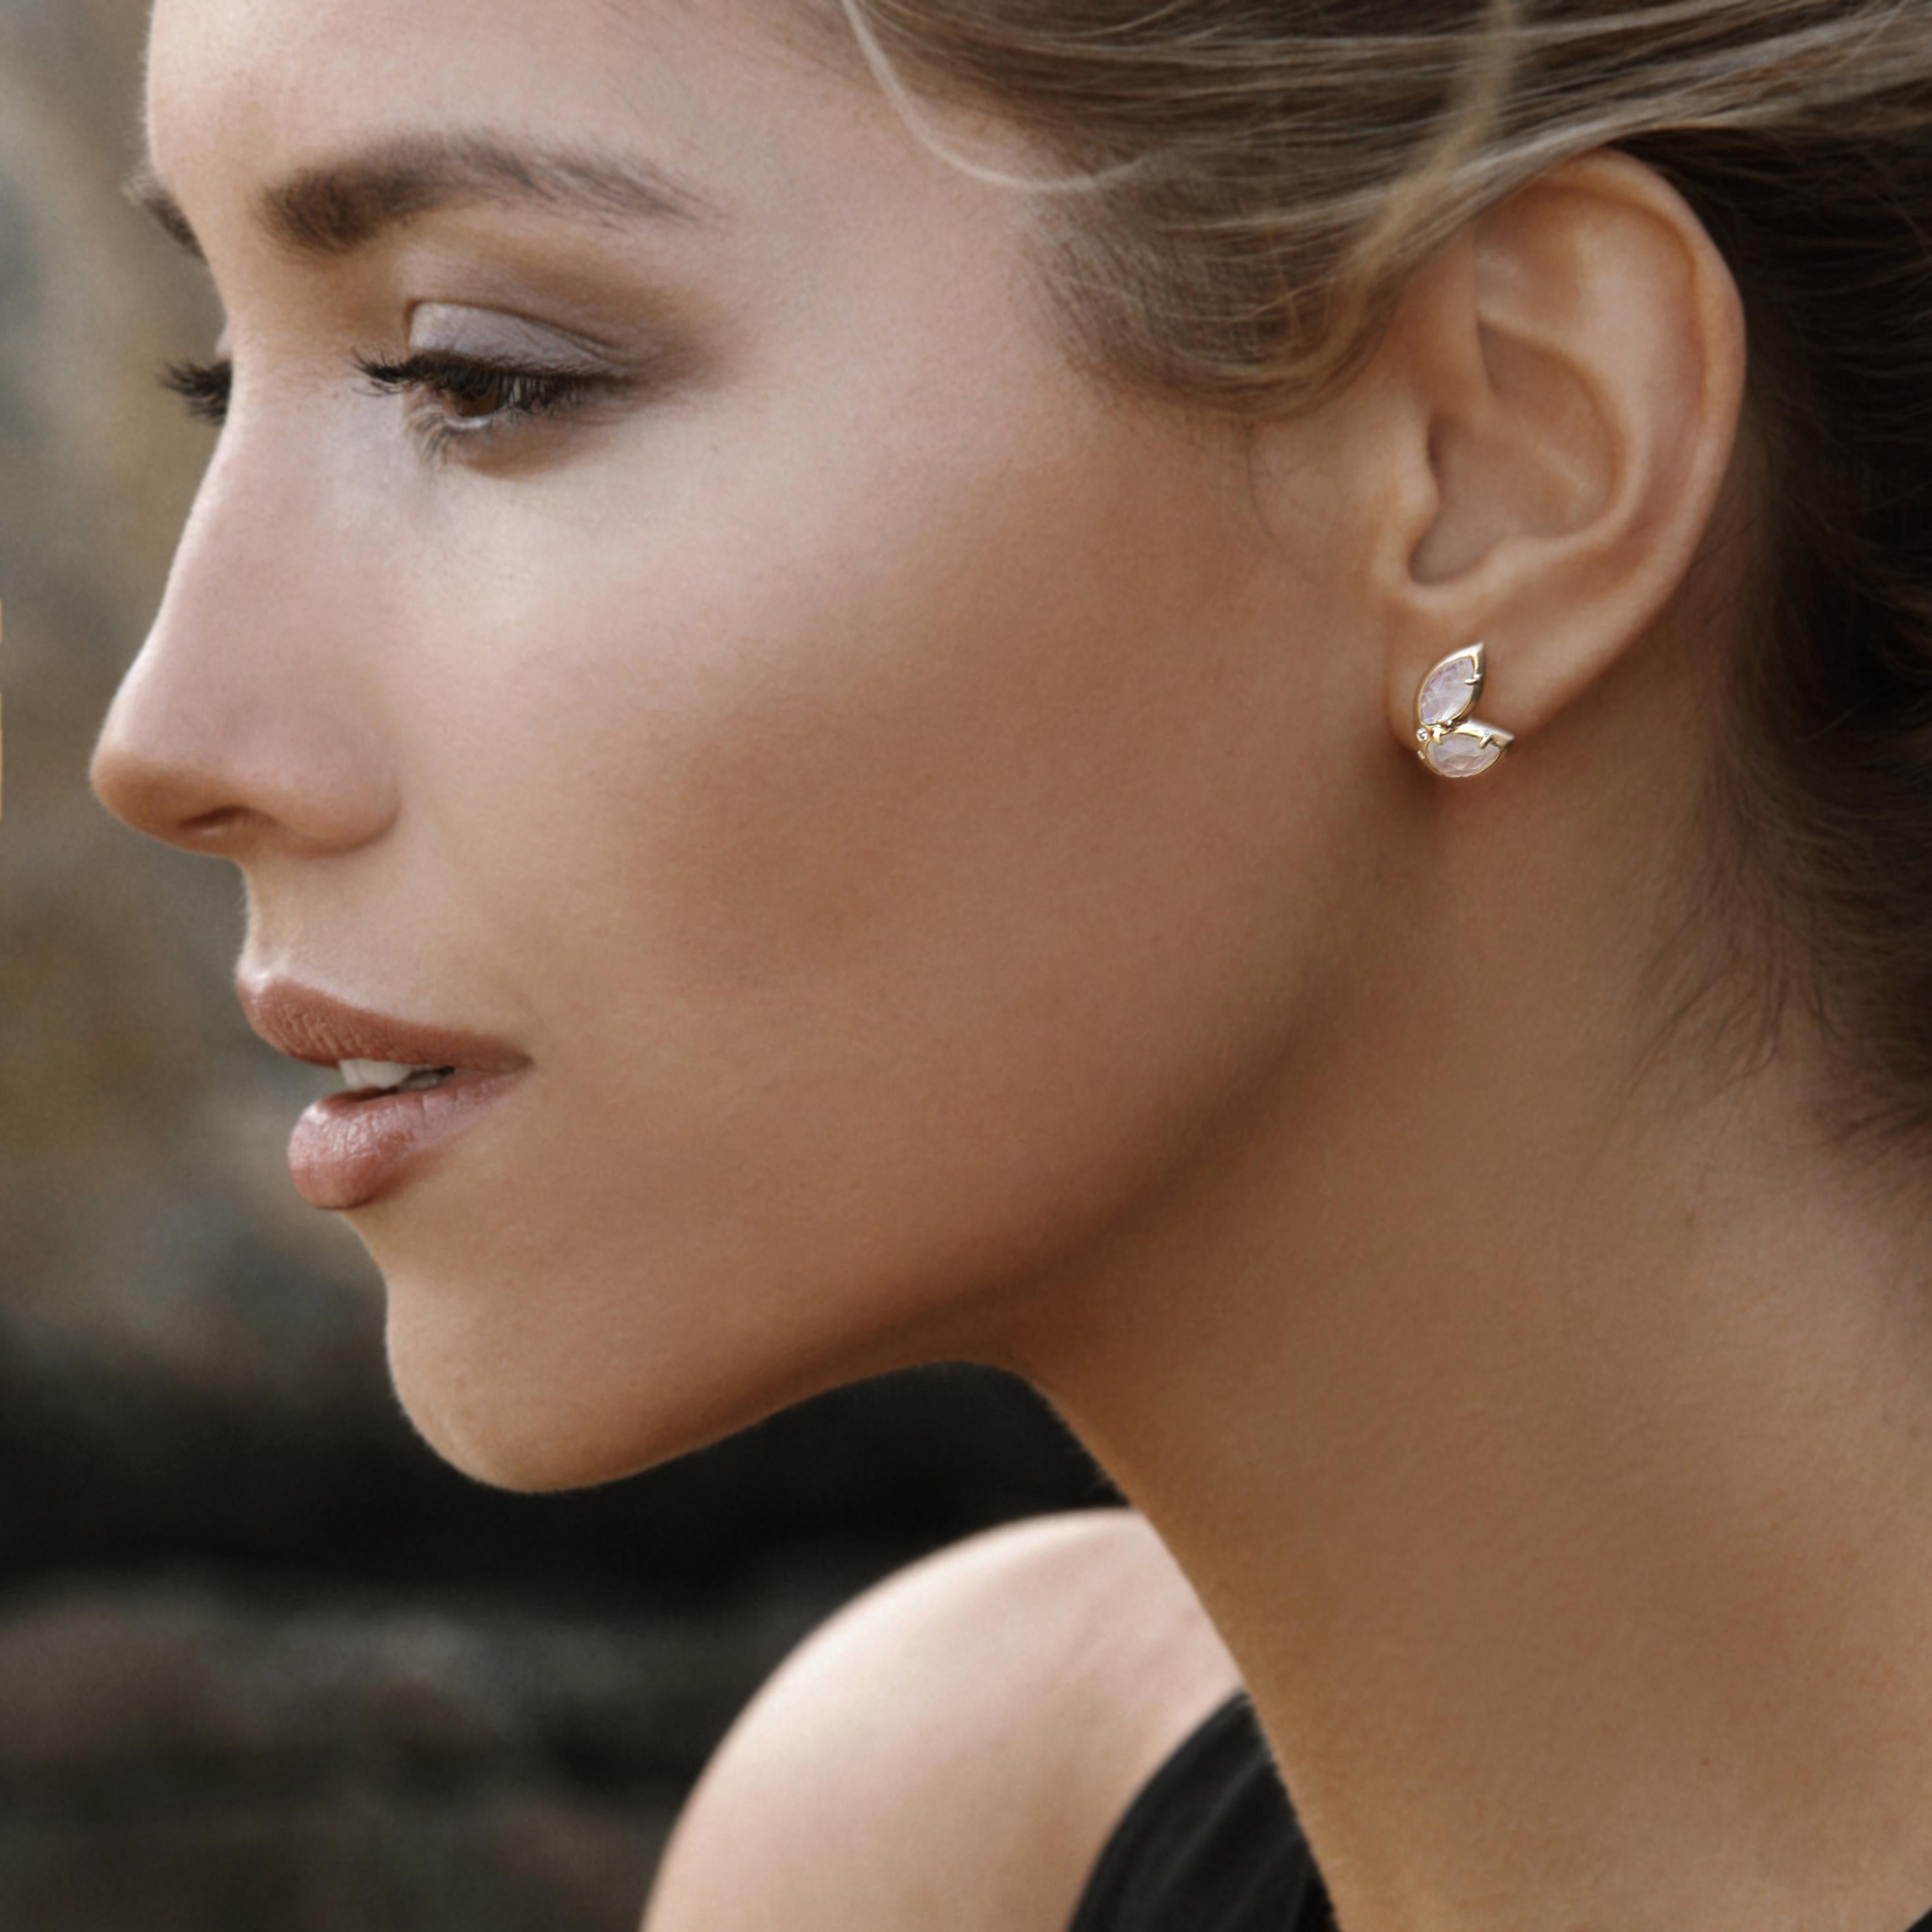 The Splay stud earring is both elegant and edgy. The creativity is yours as it can be worn in a multitude of ways. This Splay earring has marquise and pear shaped rose cut moonstones and diamond accents set in 14kt yellow gold.

14kt yellow